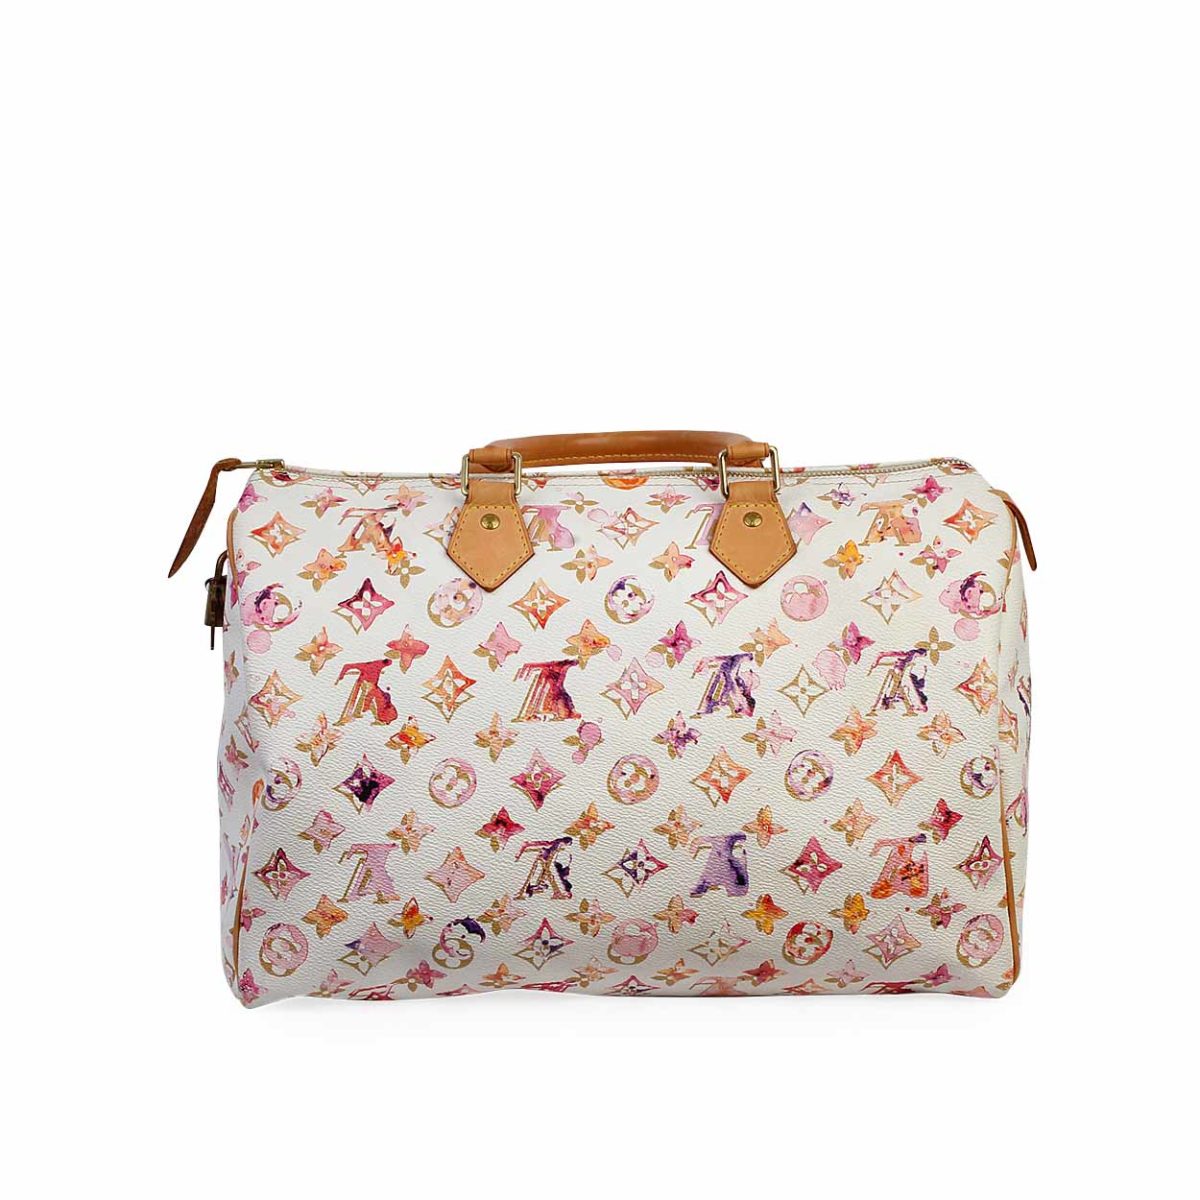 LOUIS VUITTON Richard Prince Watercolor Aquarelle Speedy 35 White - Limited Edition | Luxity